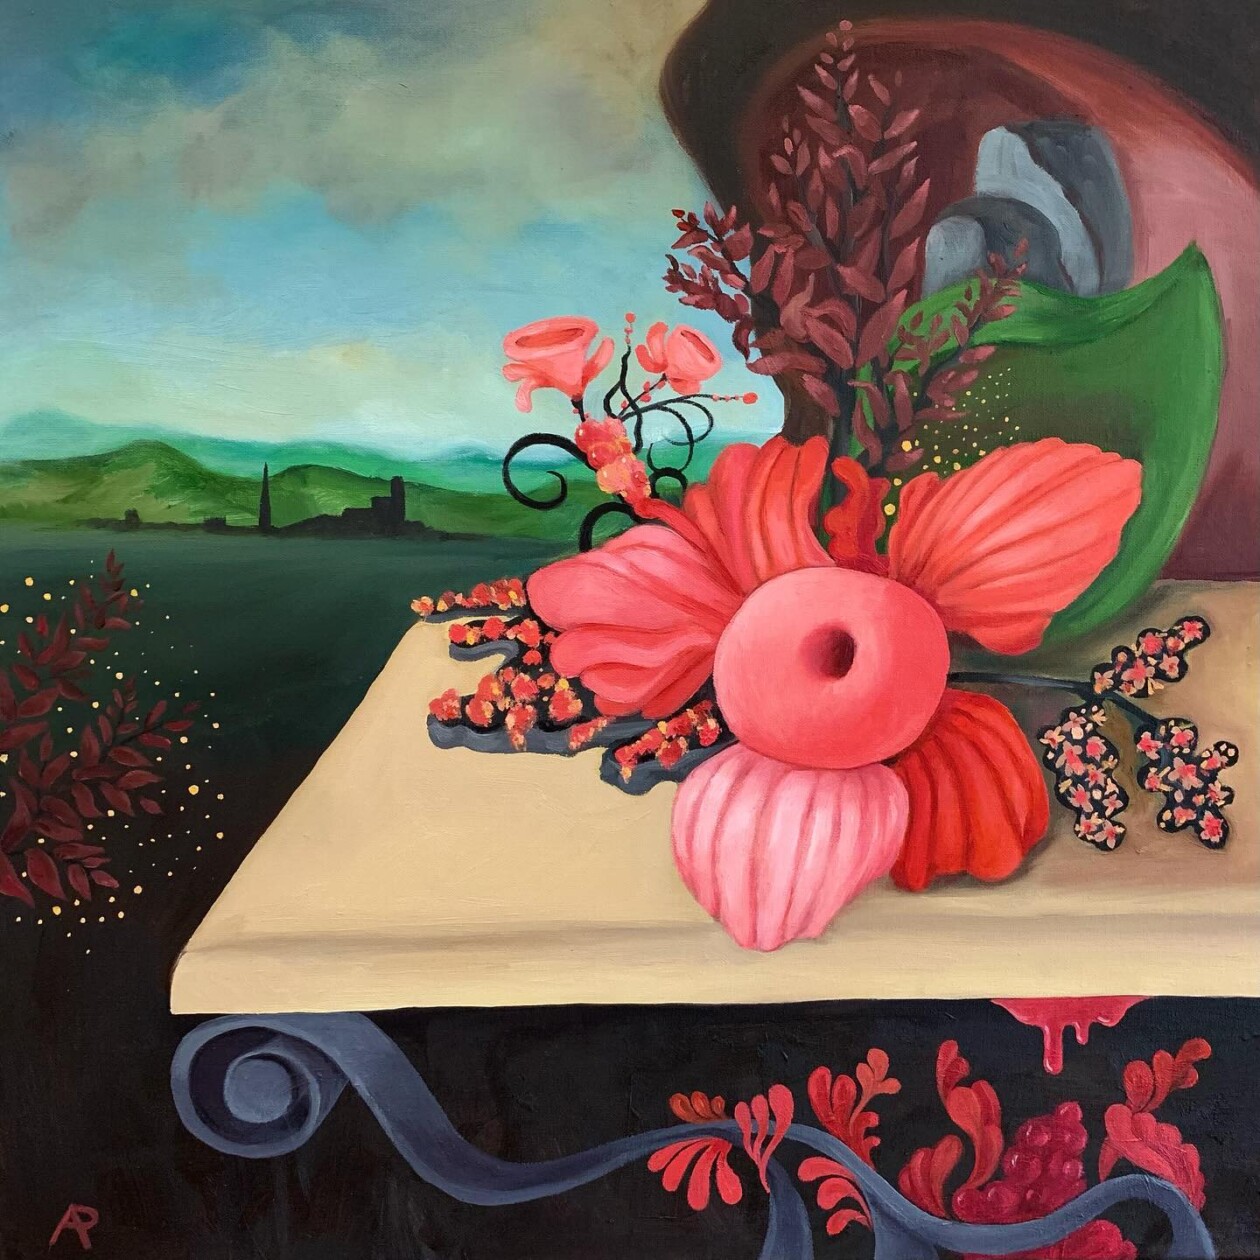 Lush Surreal Still Life Paintings By American Artist Arabella Proffer (6)